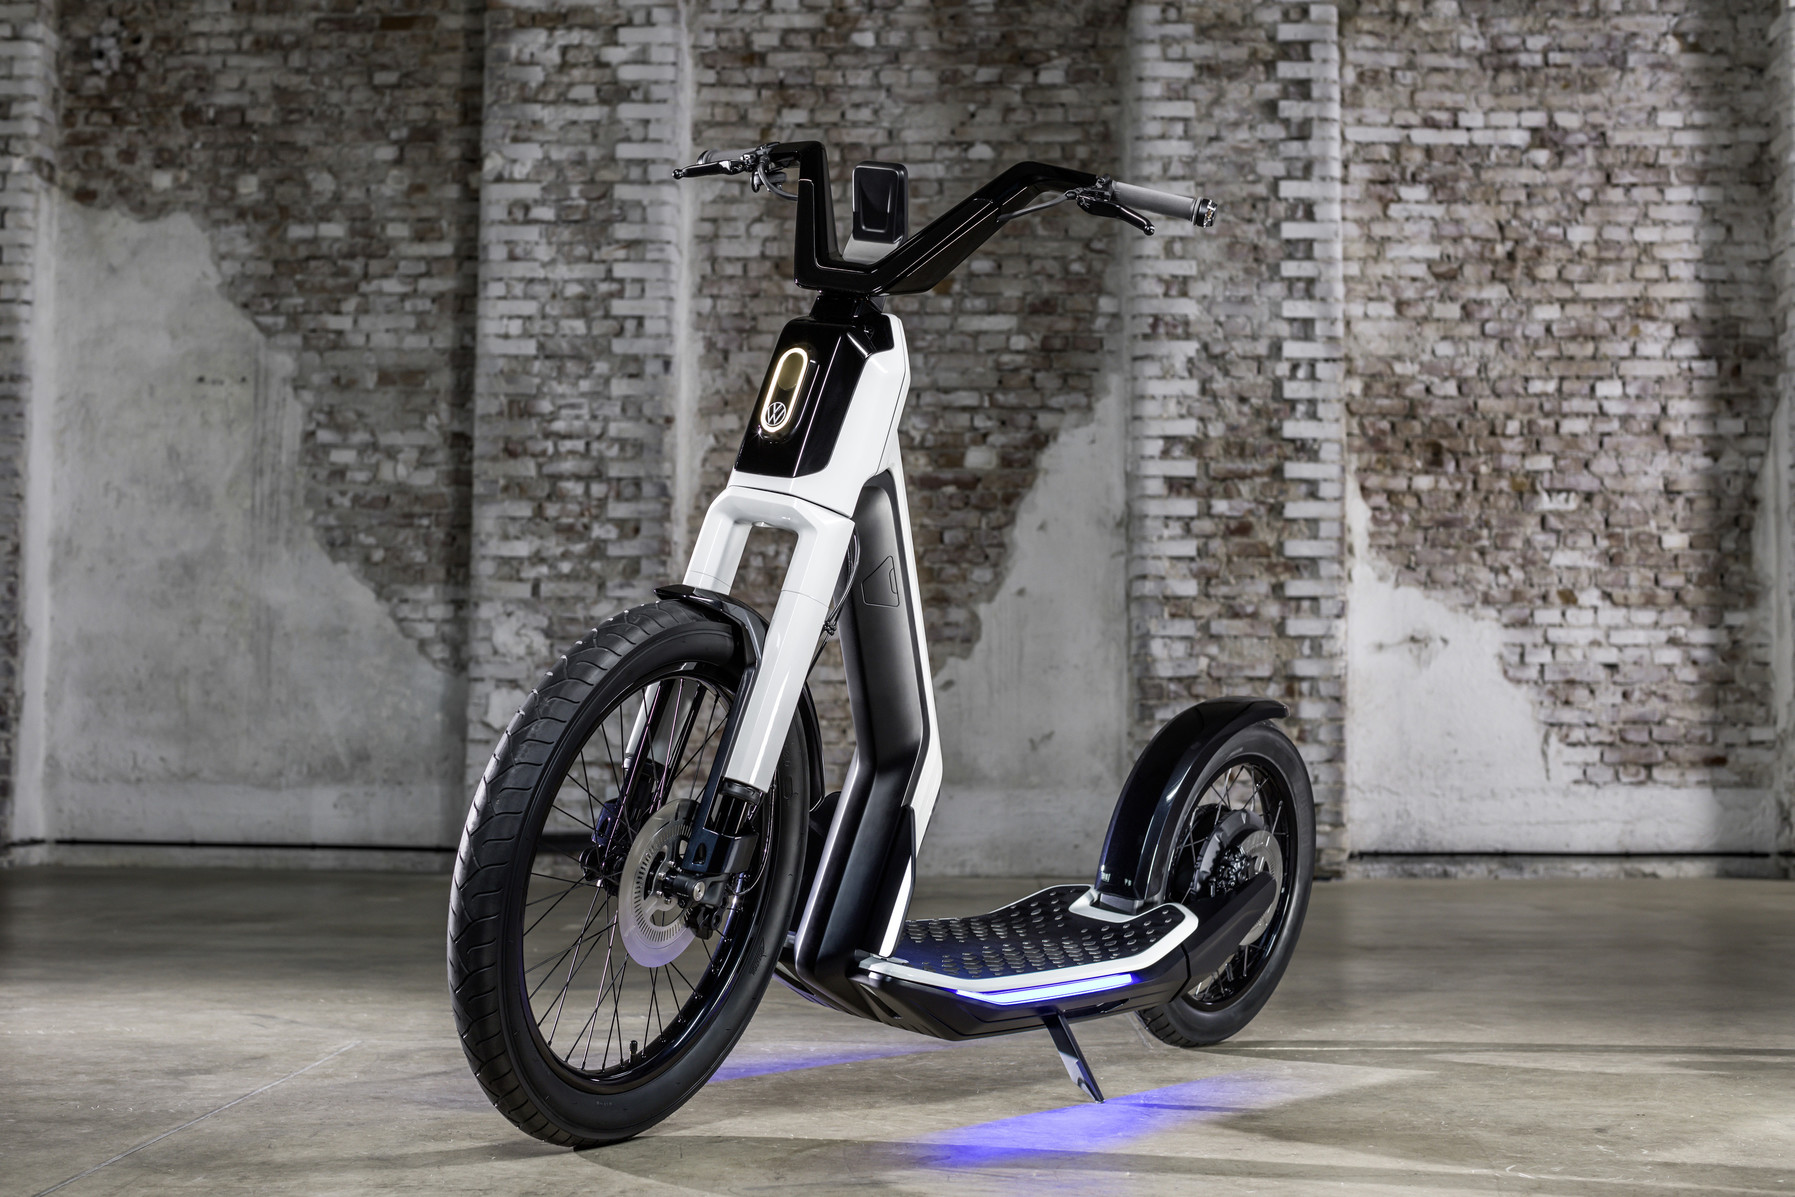 volkswagen offers two cool scooter designs for zipping around town die neue studie streetmate